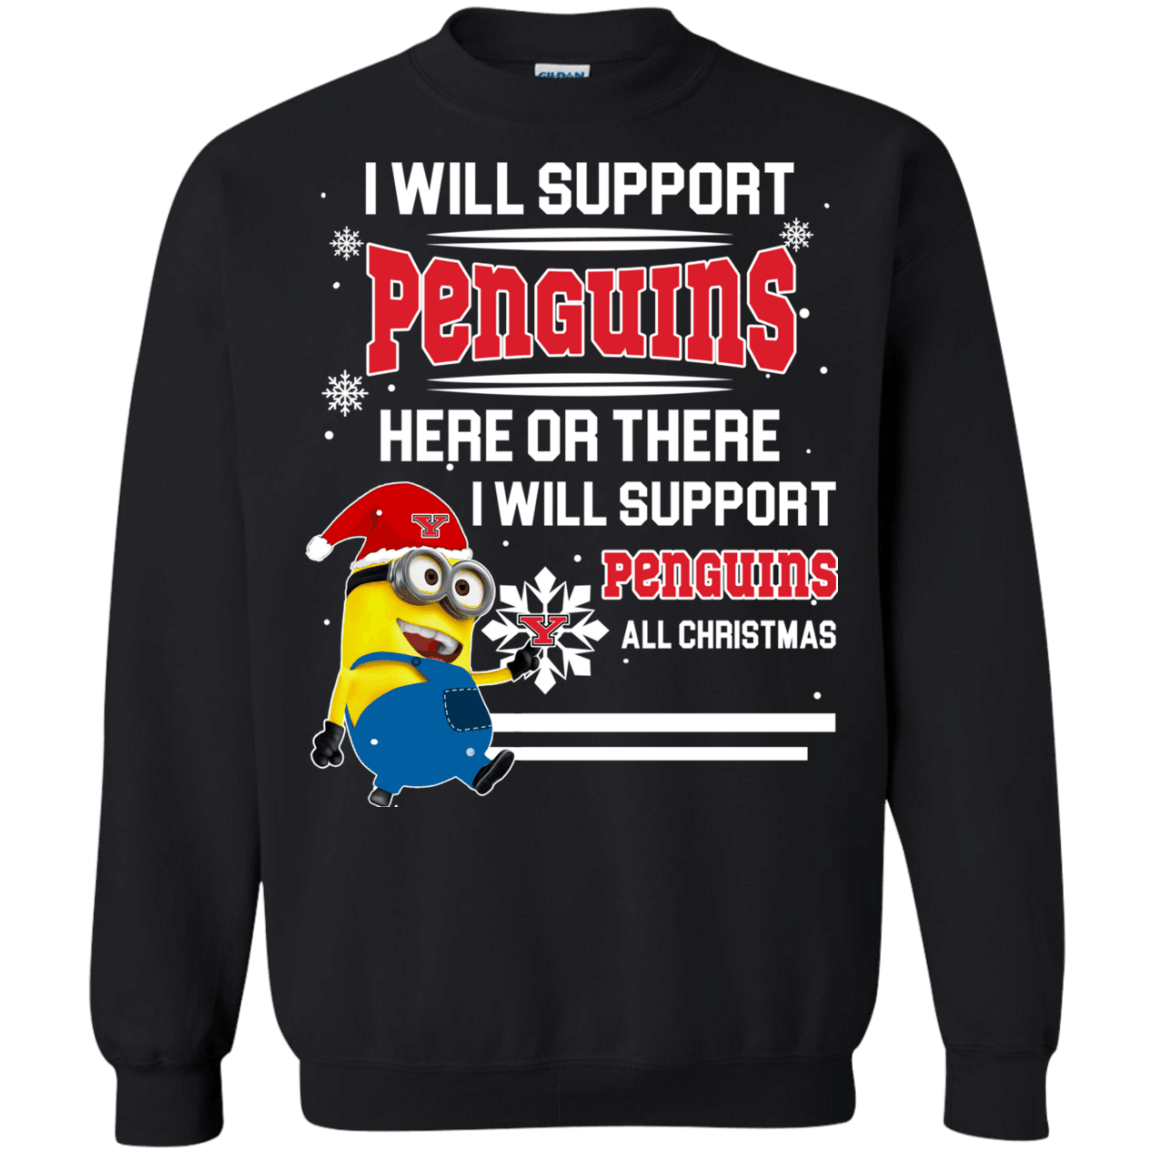 Amazing tee Youngstown State Penguins Minion Ugly Christmas Sweaters Support Here Or There All Christmas Sweatshirts